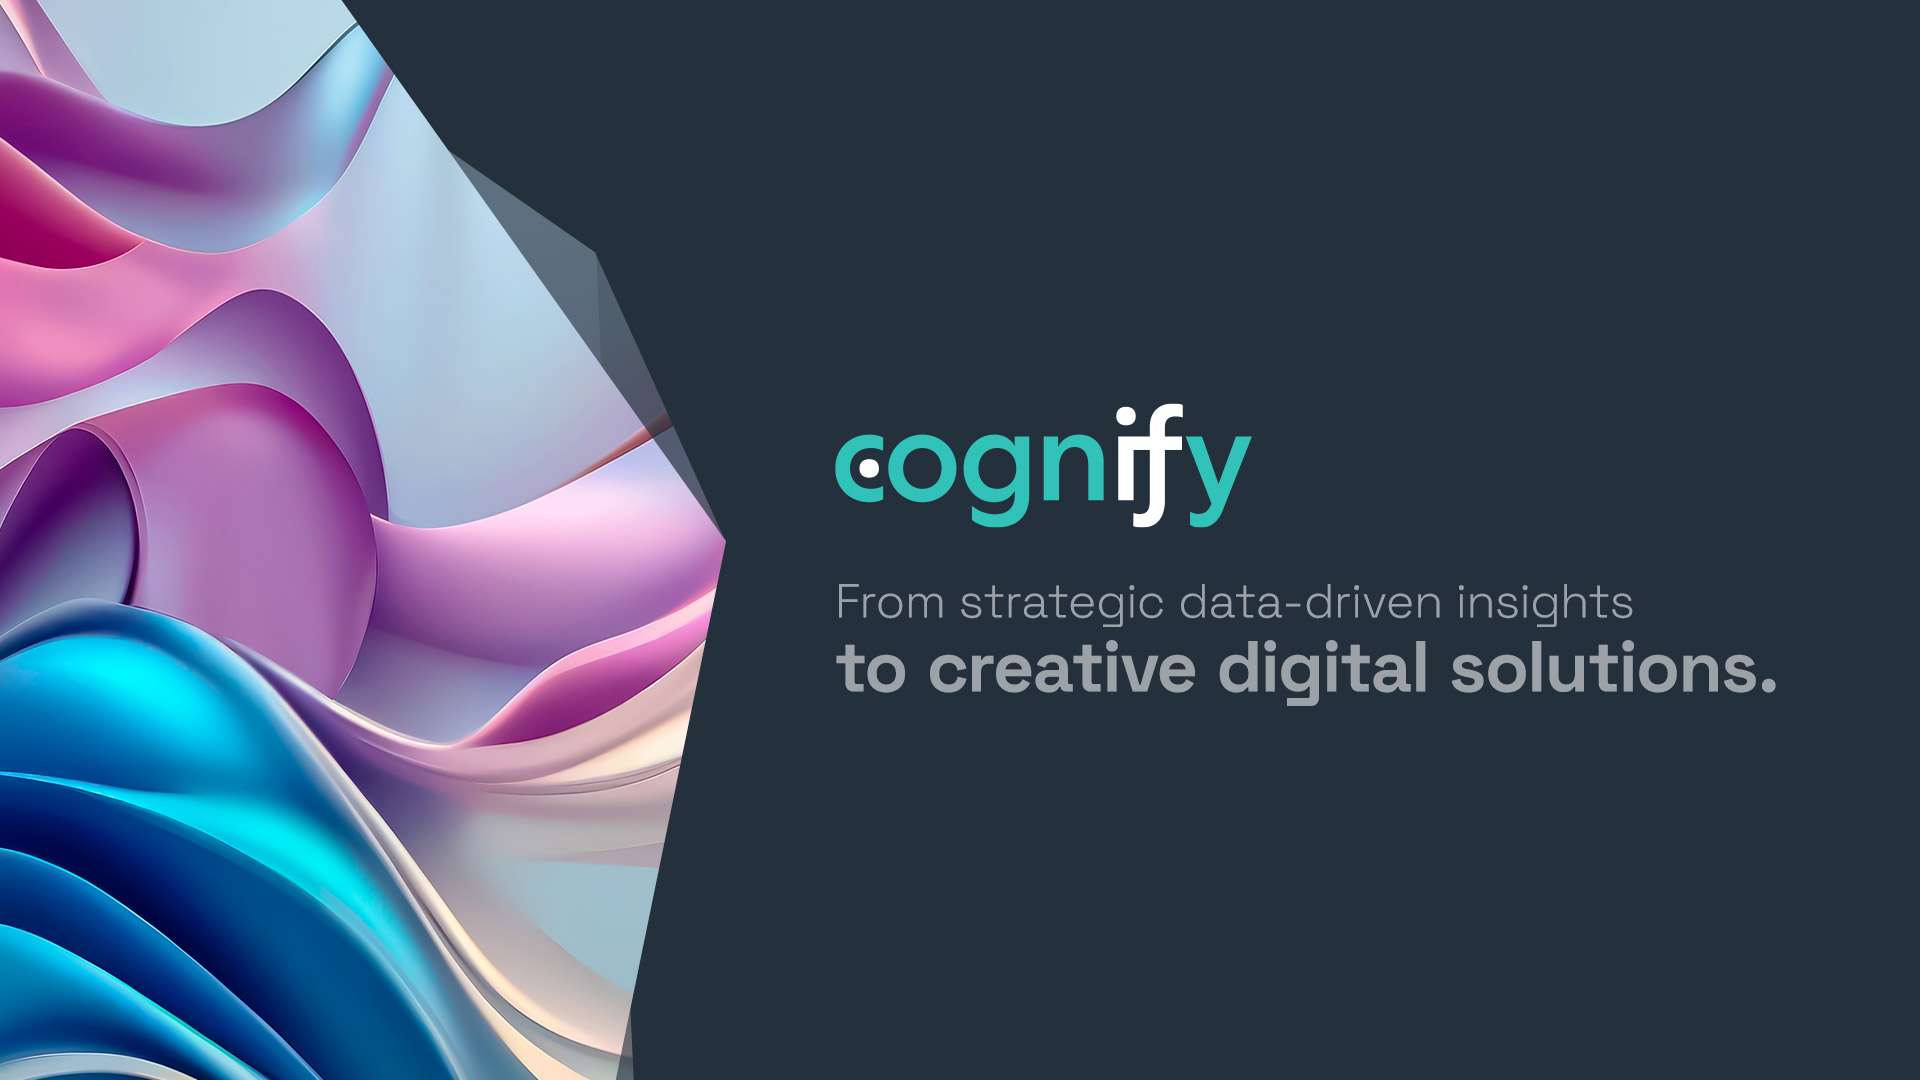 cognify - From Strategic data-driven insights to creative digital solutions.